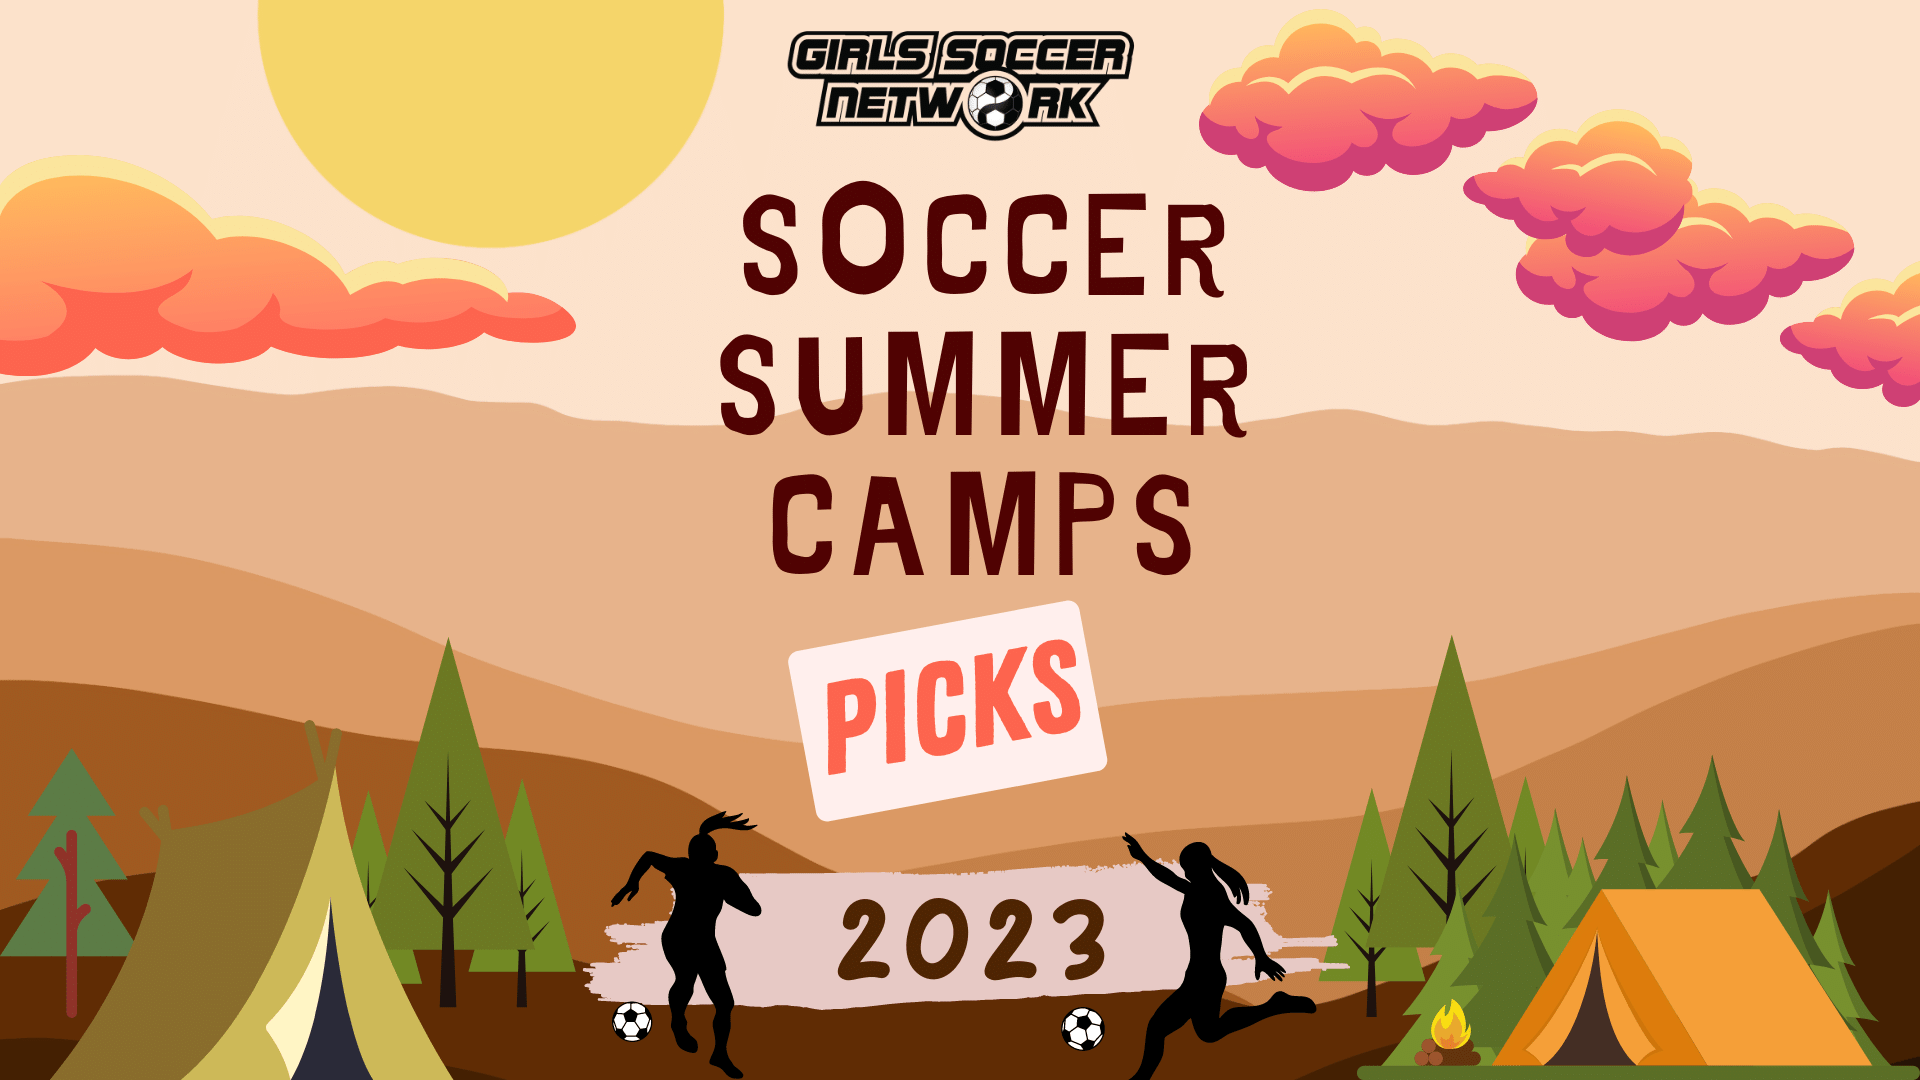 Our girls soccer camp picks this summer of 2023